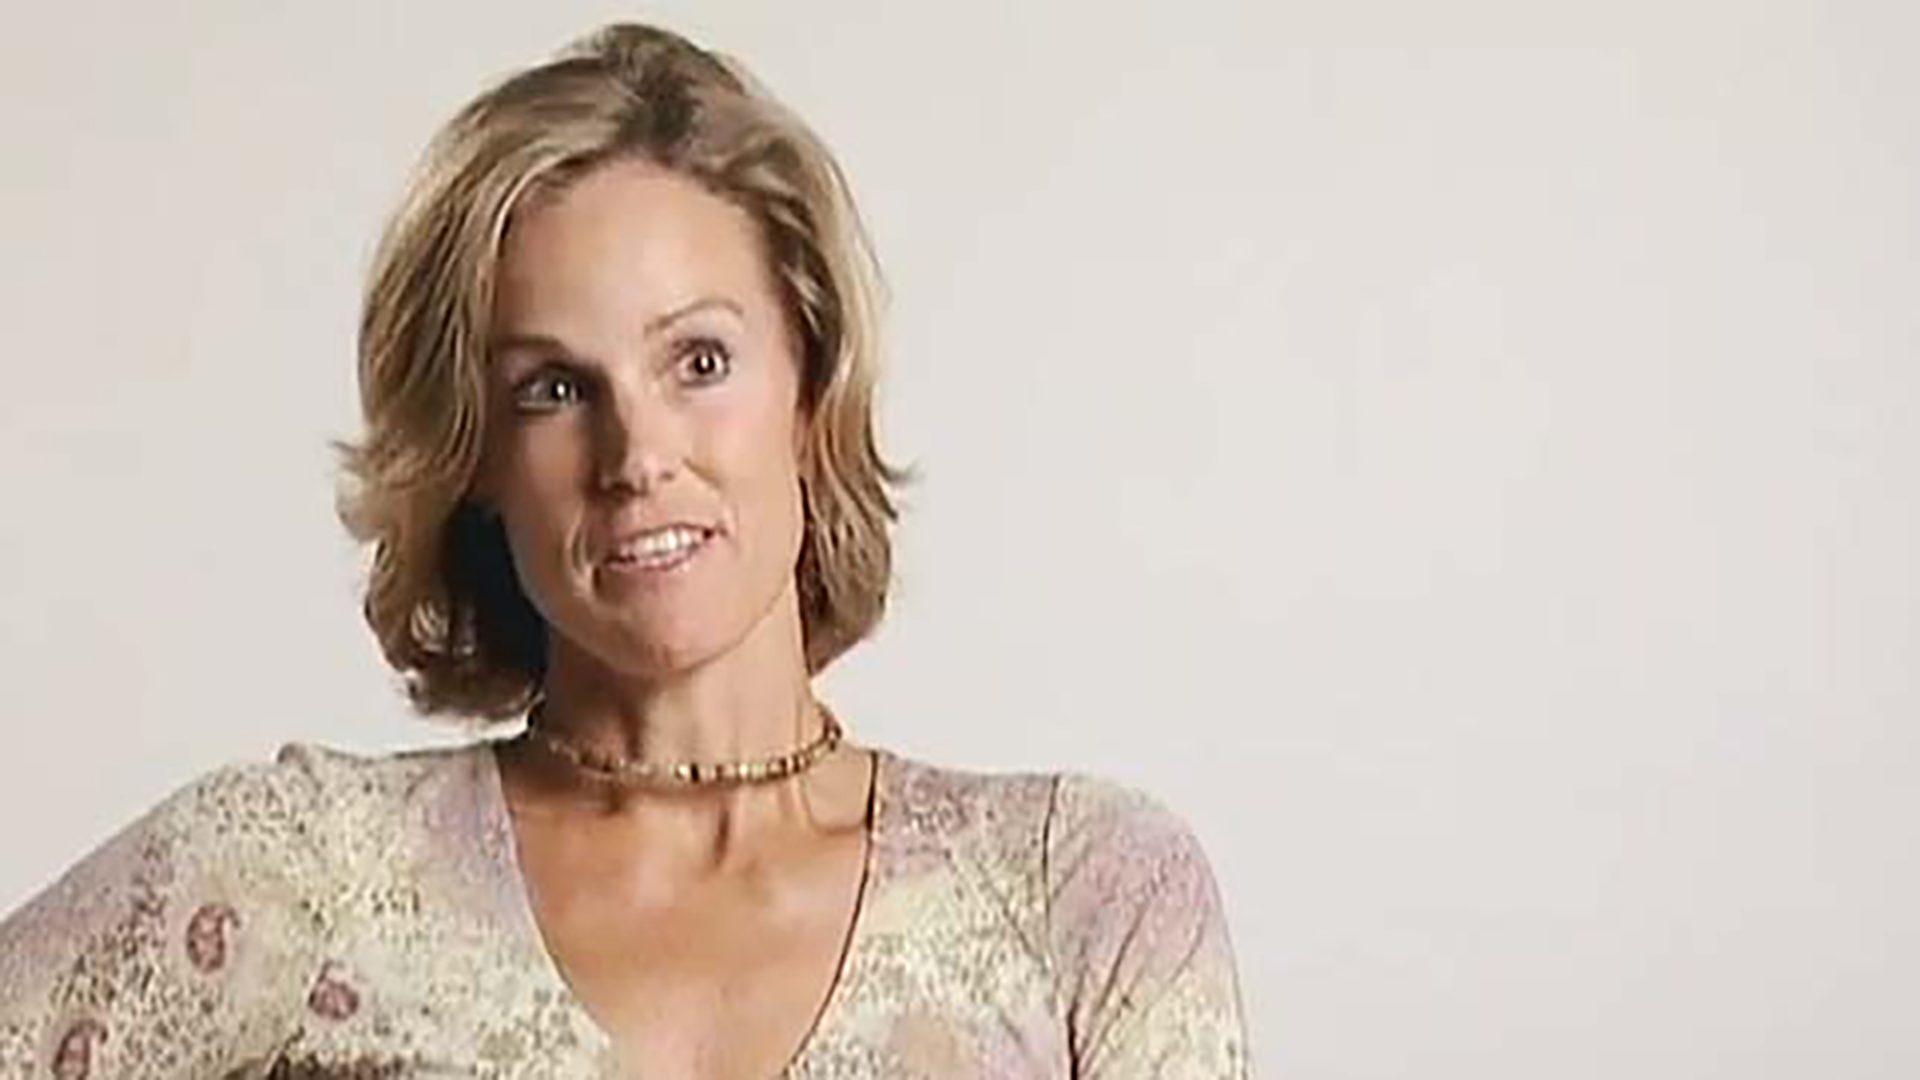 A blonde woman in a patterned shirt being interviewed against a white background